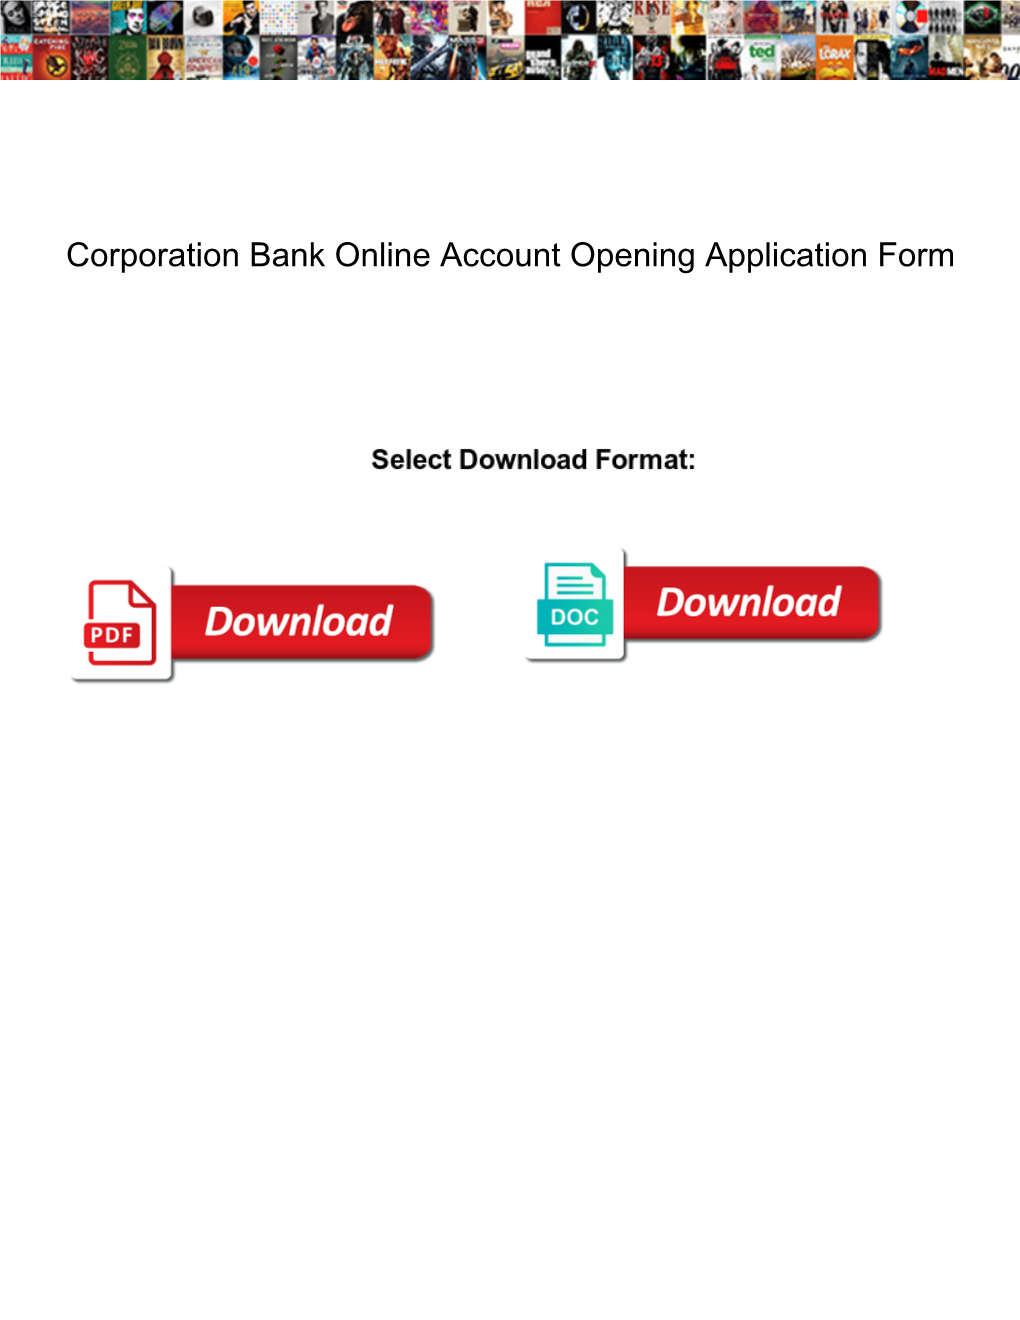 Corporation Bank Online Account Opening Application Form